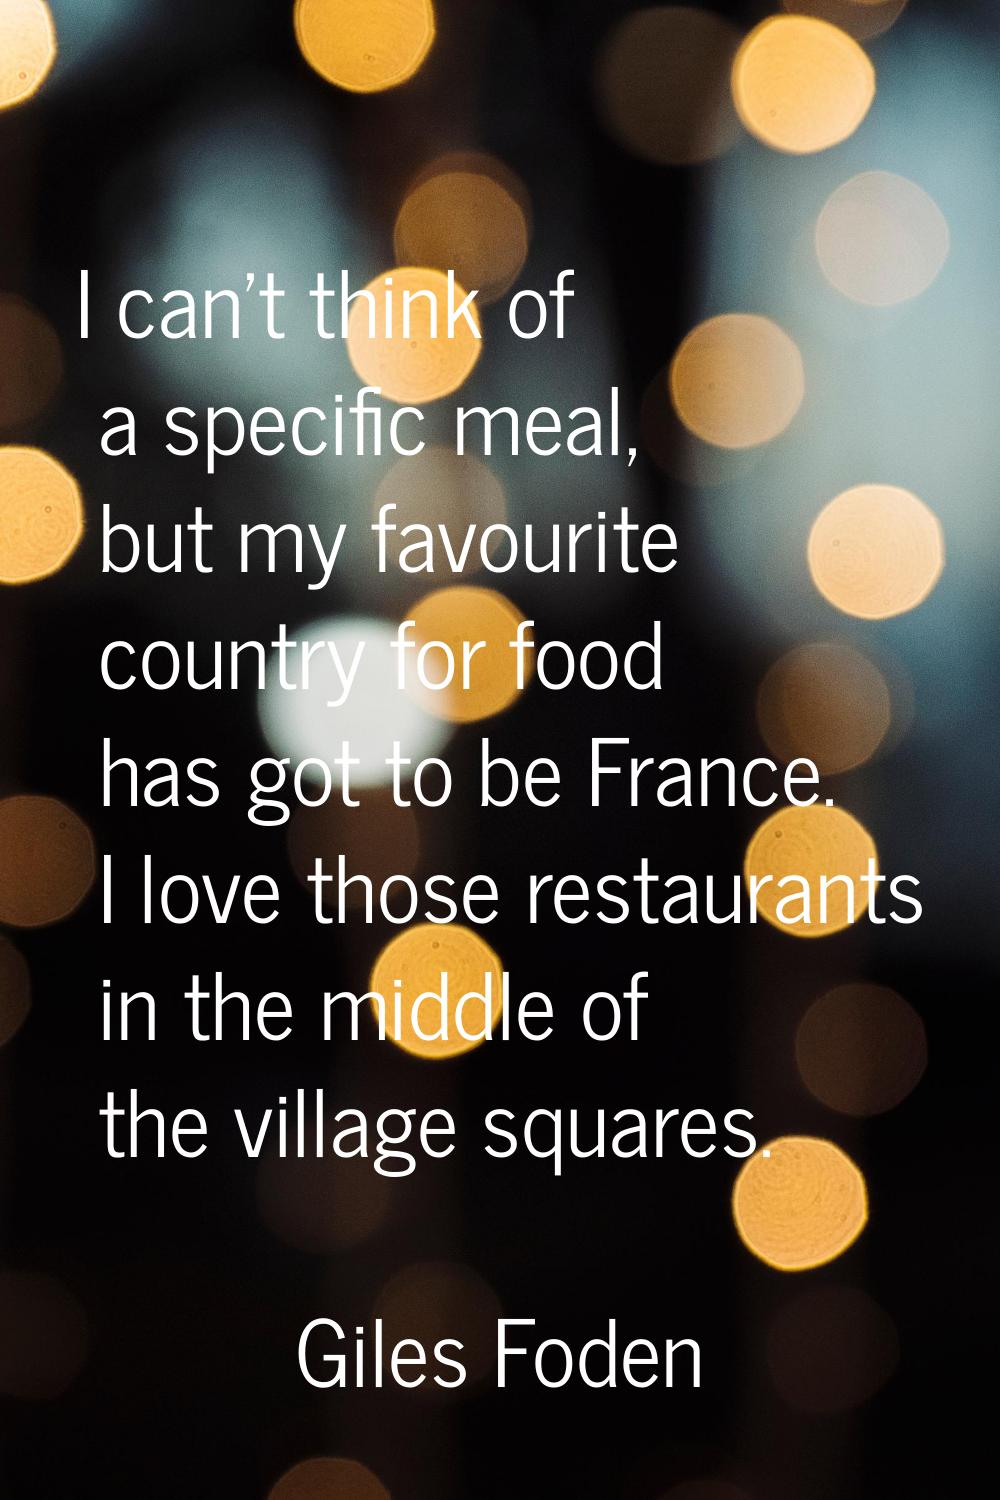 I can't think of a specific meal, but my favourite country for food has got to be France. I love th